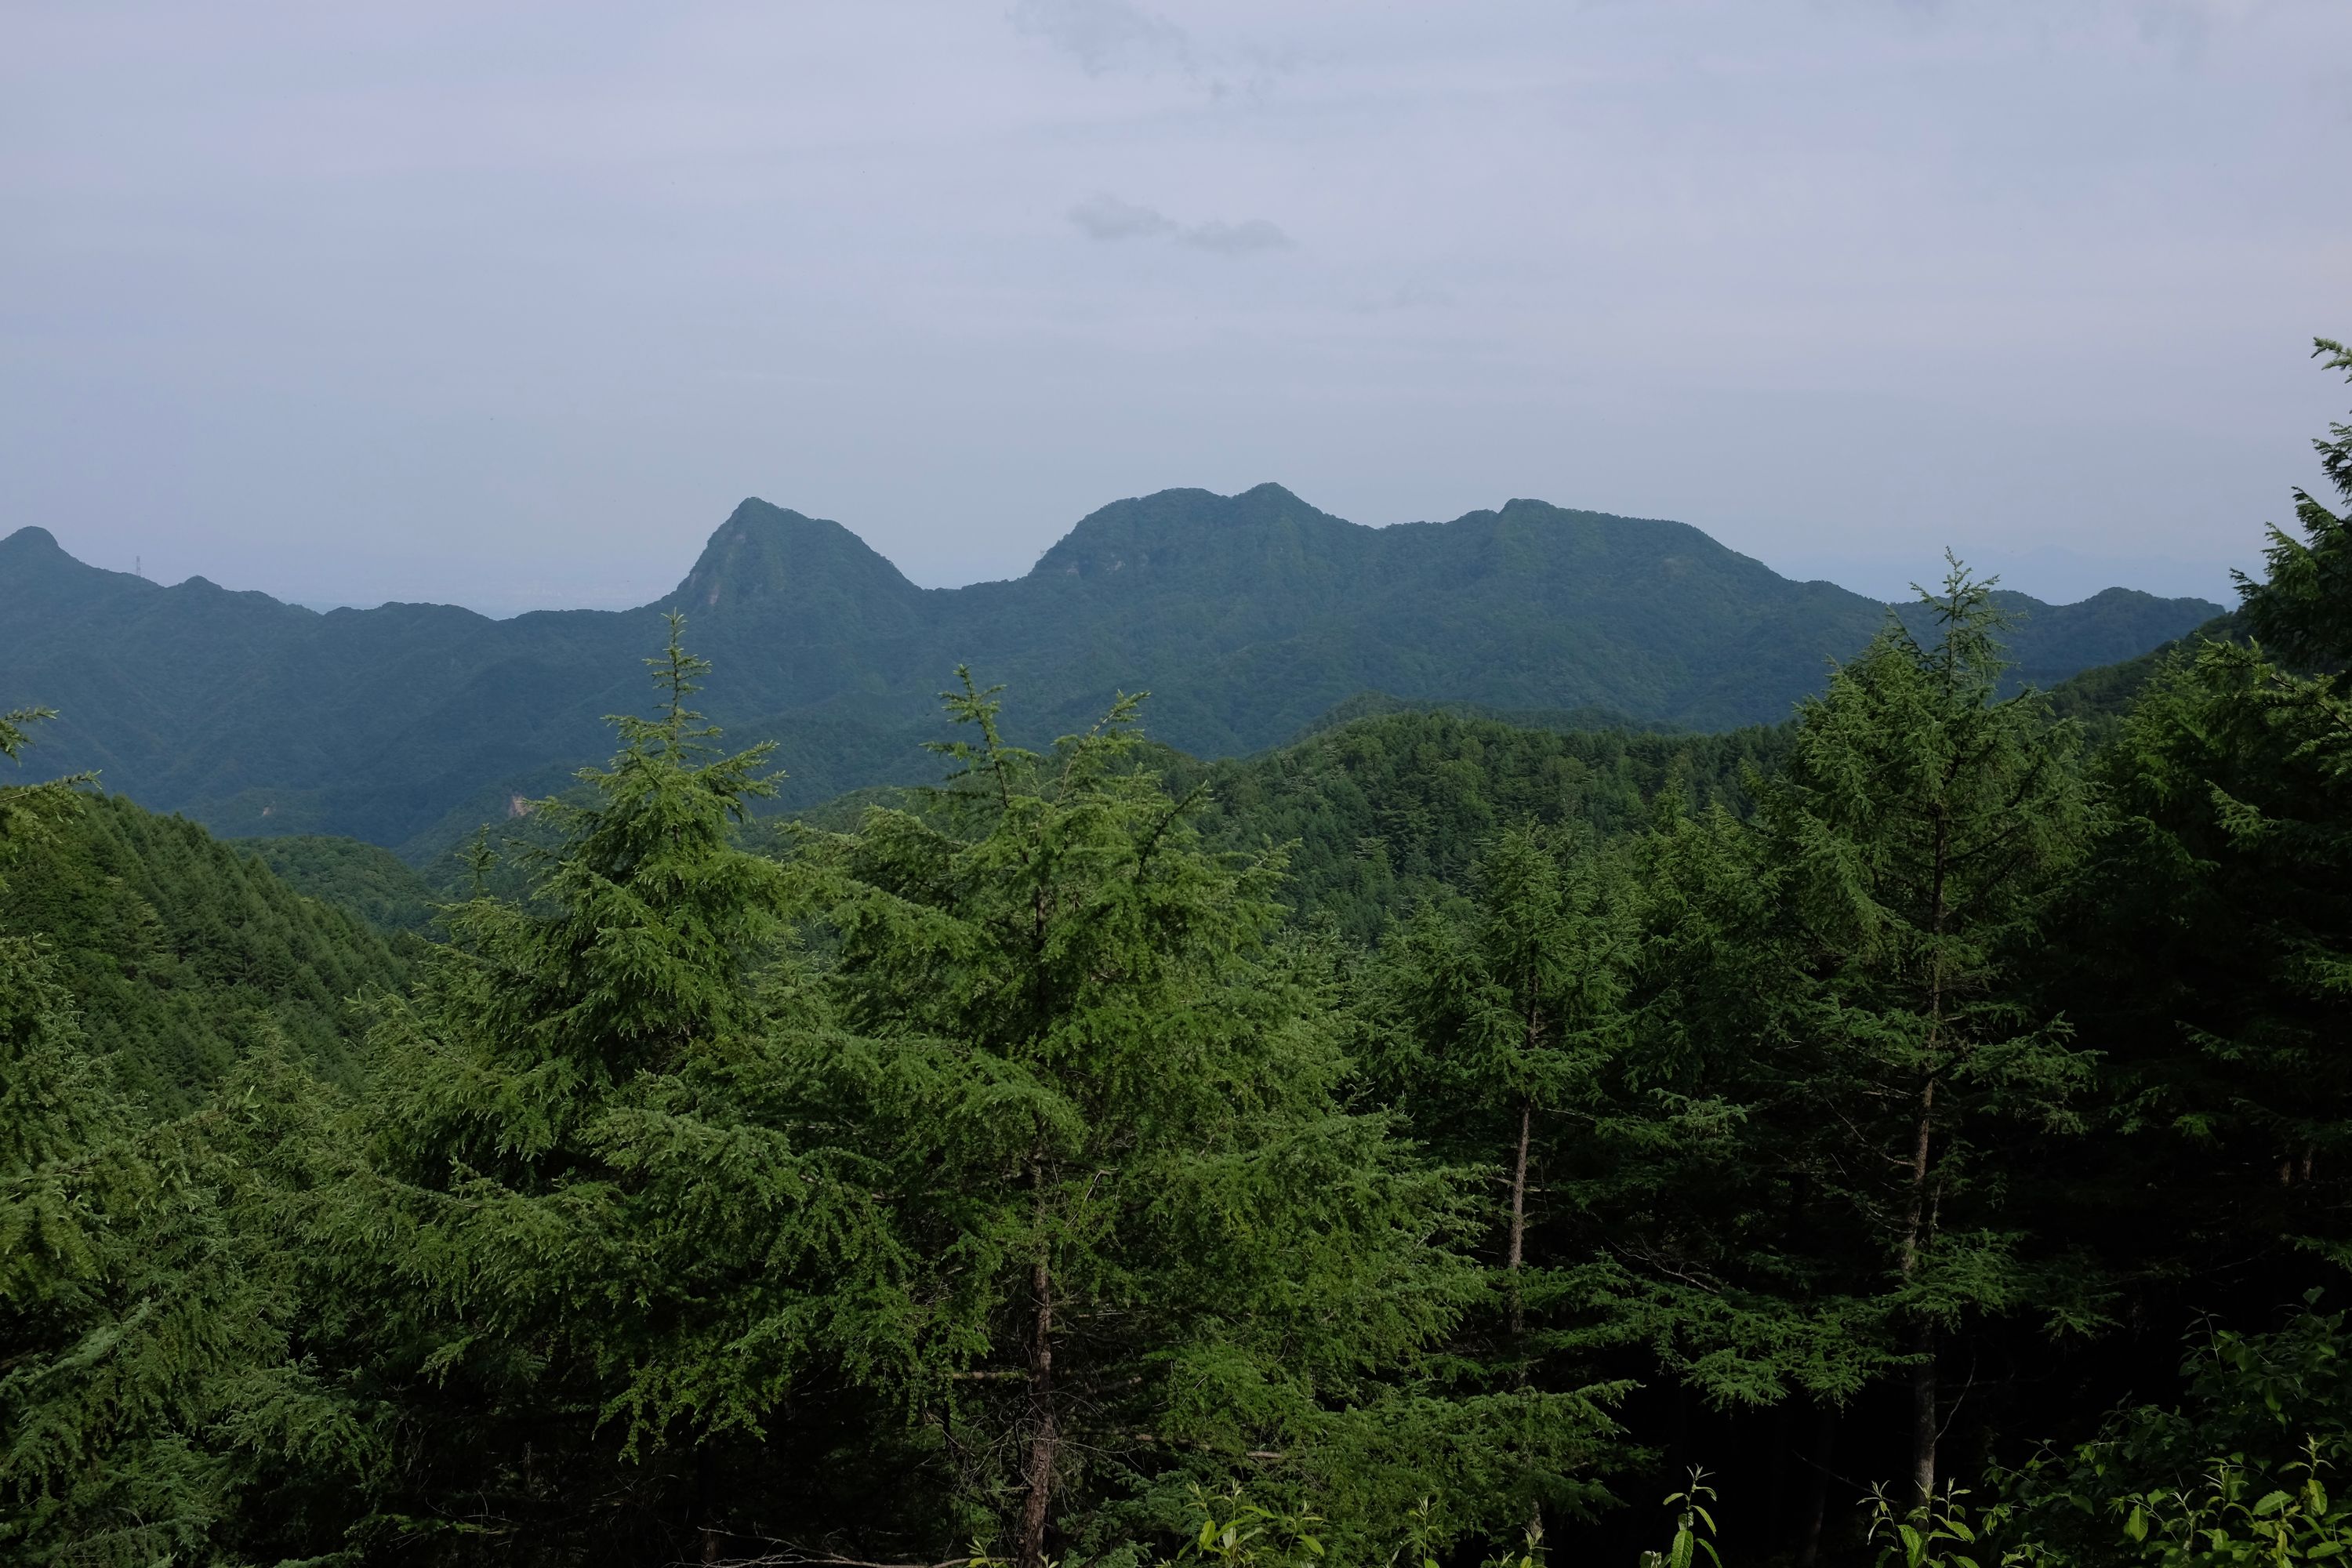 A jagged mountain ridge rises from thick forest.